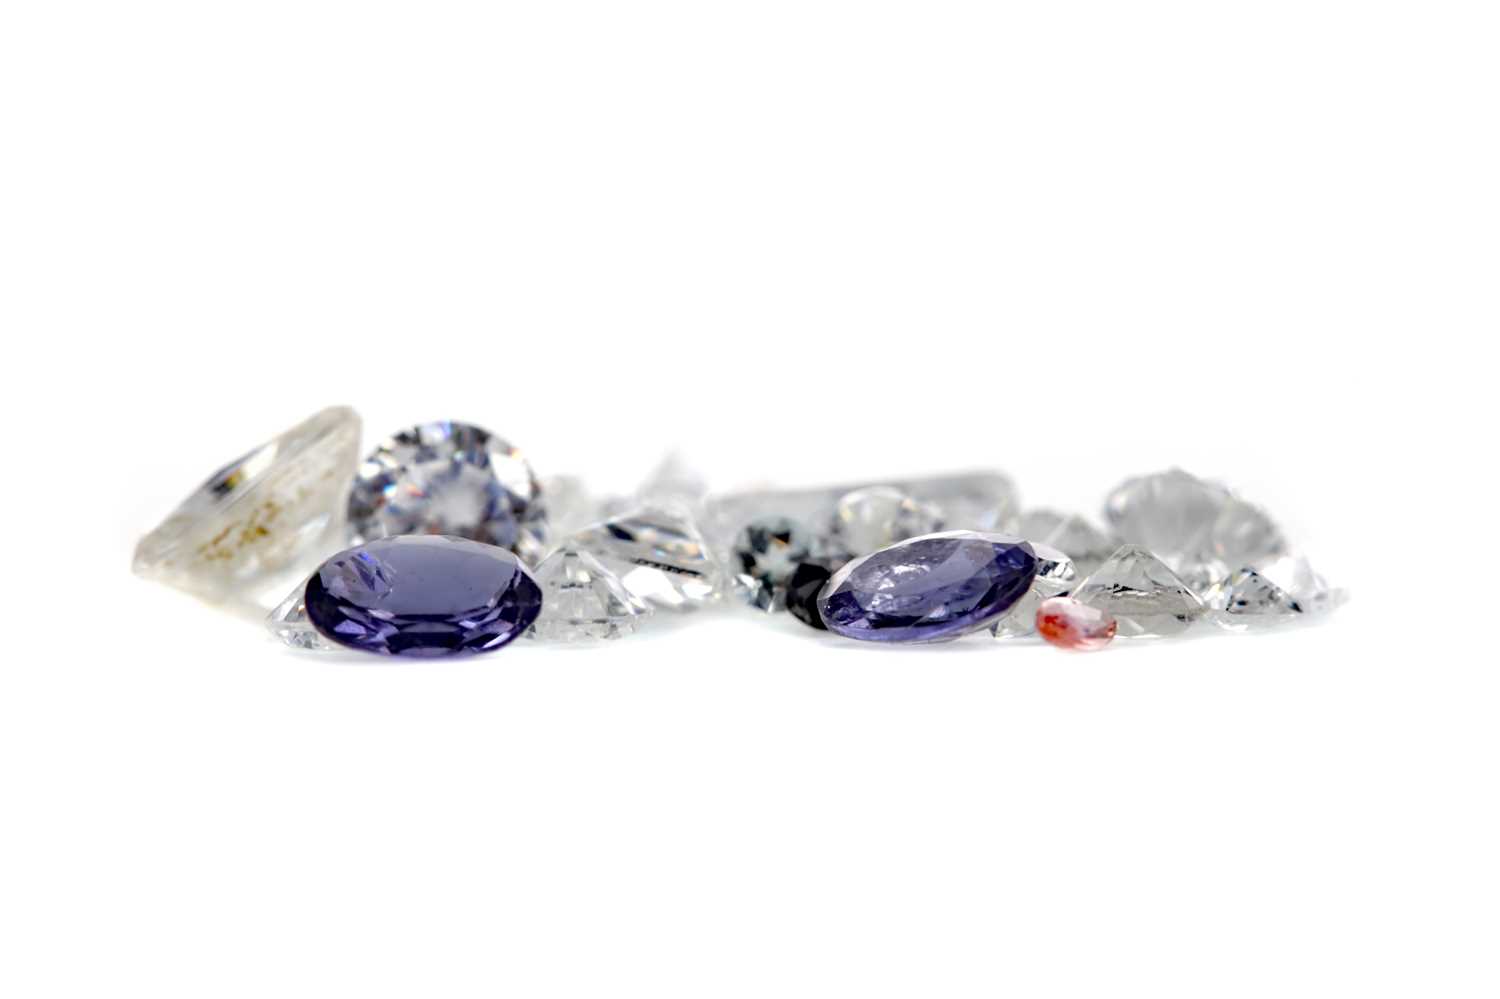 Lot 425 - A COLLECTION OF UNMOUNTED GEMS